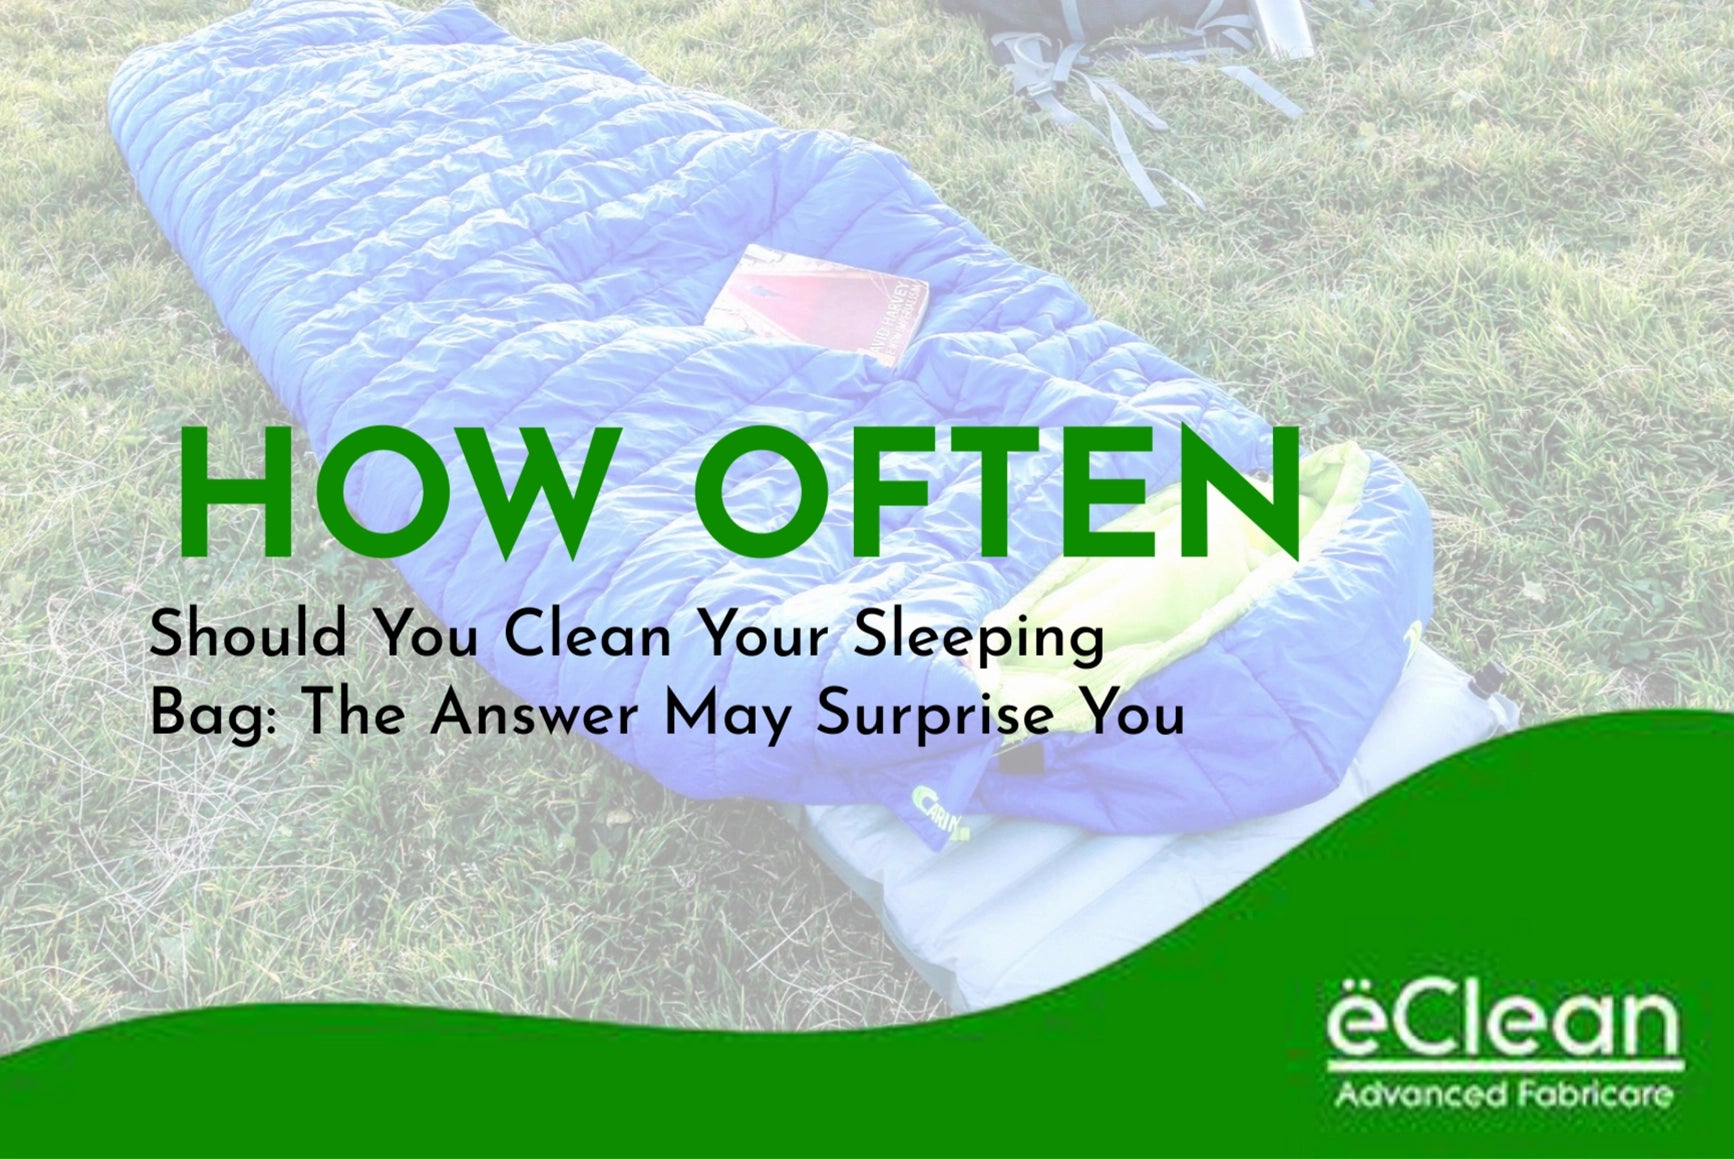 How Often Should You Clean Your Sleeping Bag: The Answer May Surprise You